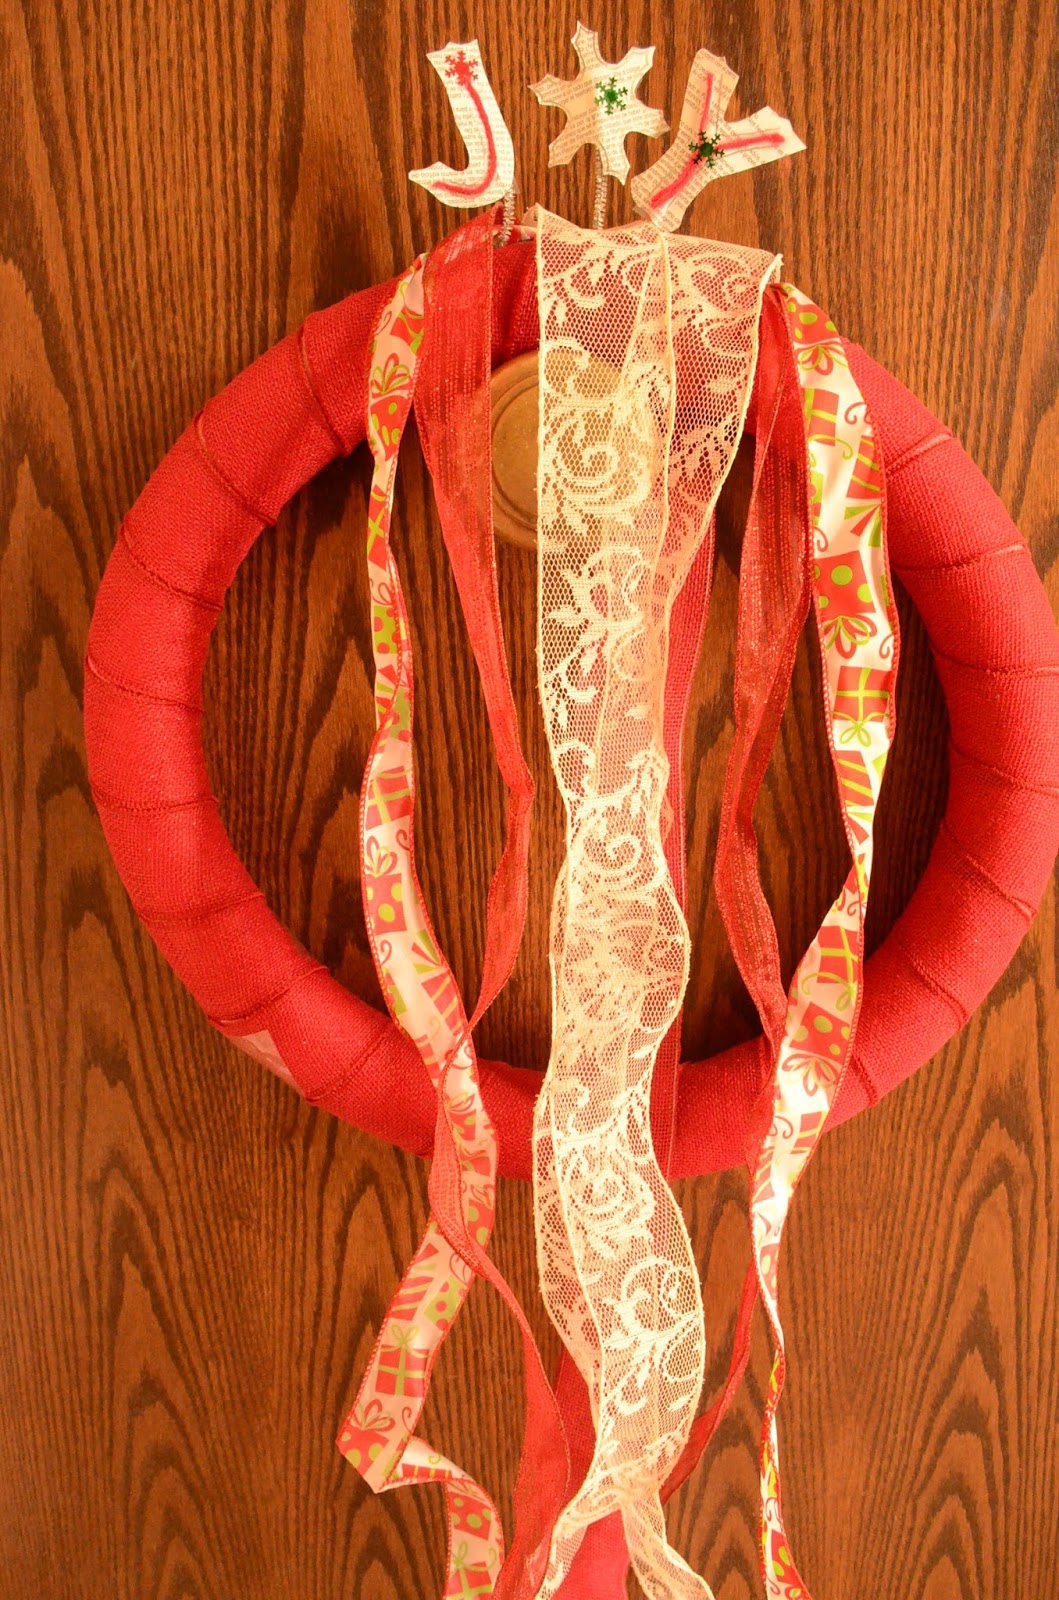 Practical Mom: DIY Pool Noodle Wreath: Avoid the Pitfalls!